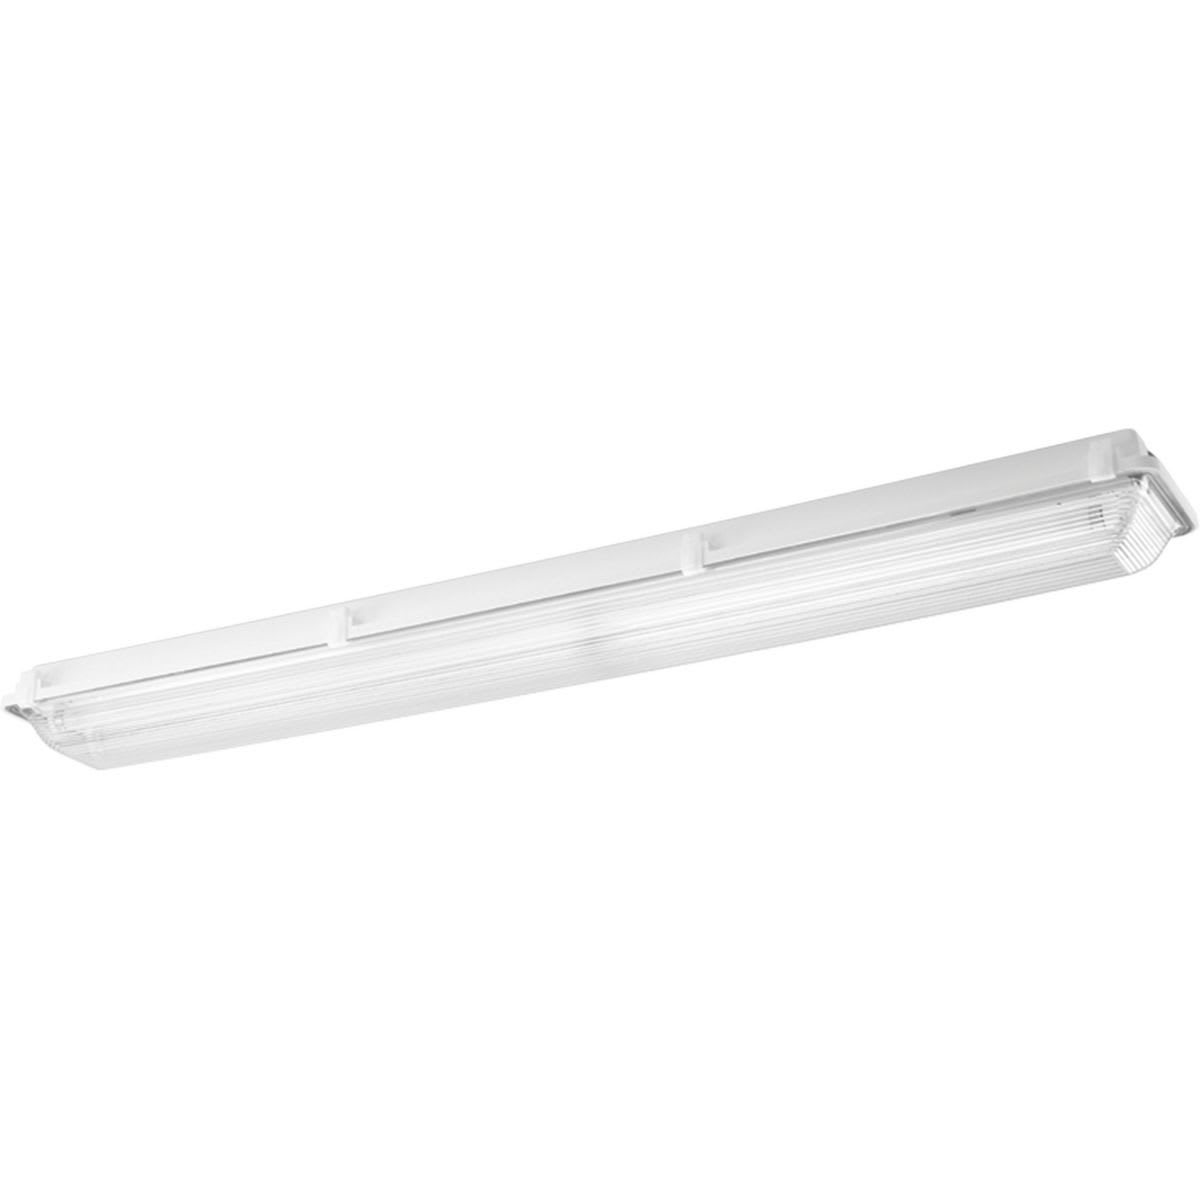 Nuvo 65 1092 LED Ceiling Wrap, White - 2